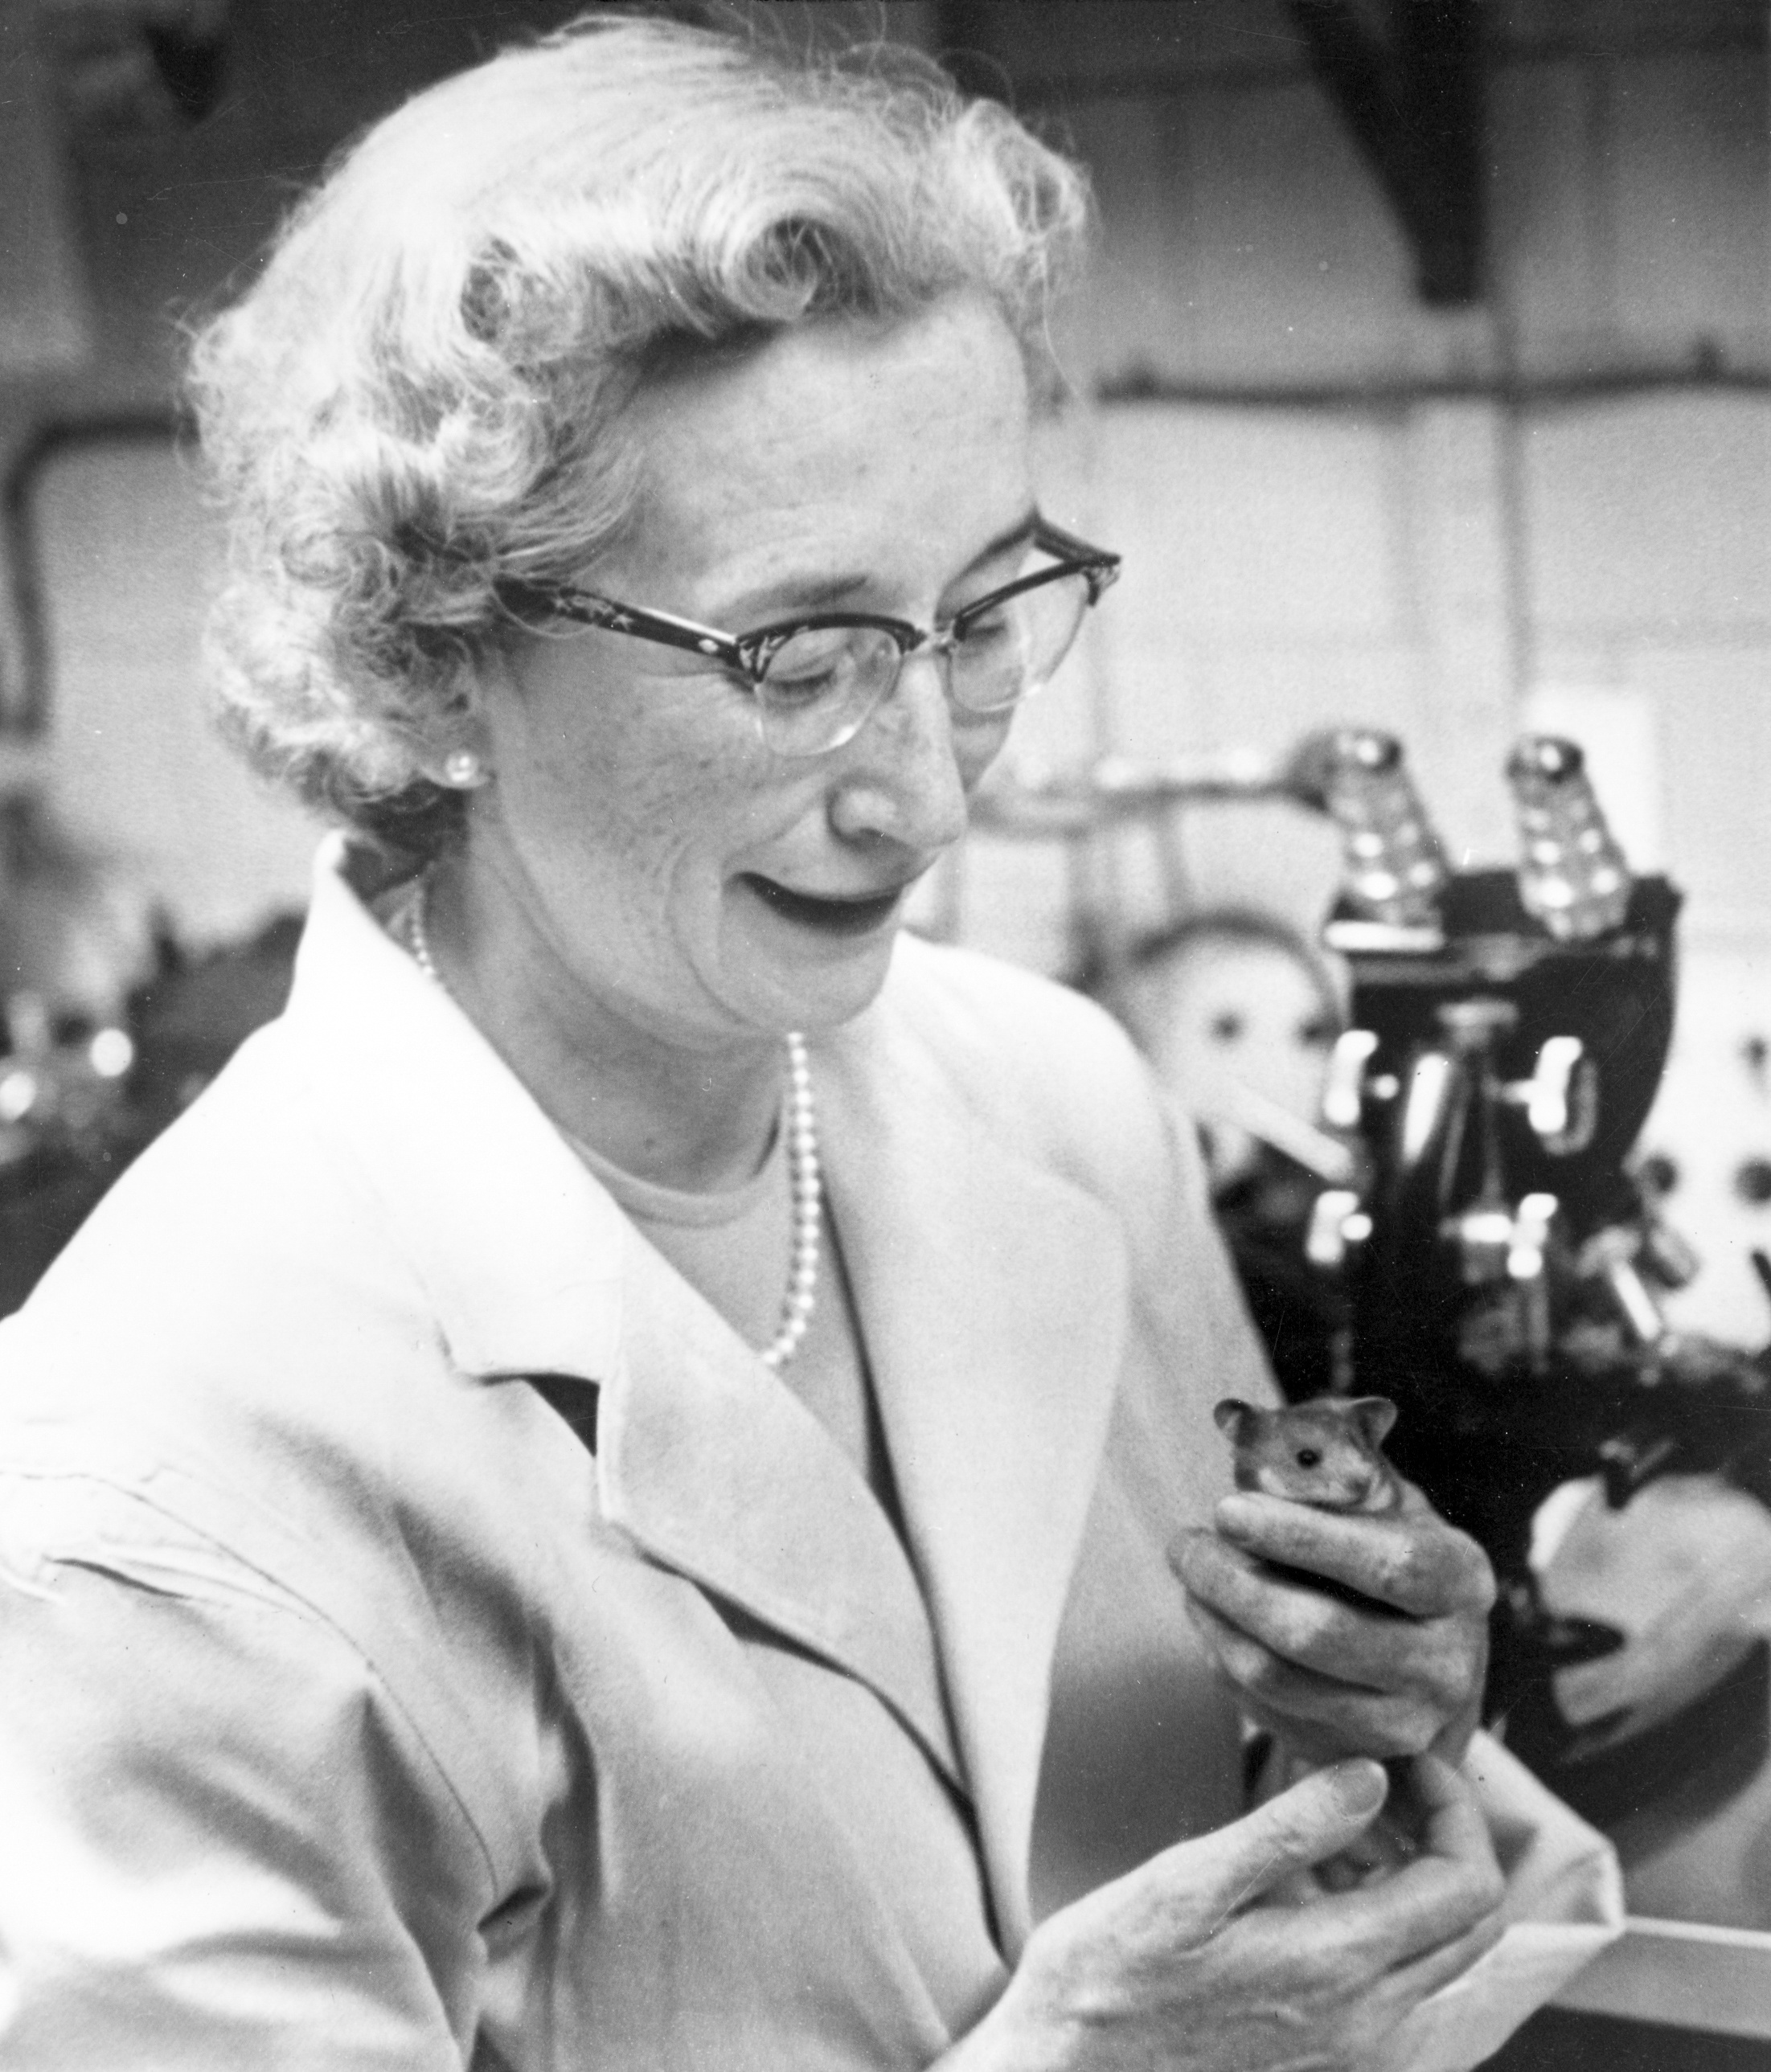 Dr Stewart photographed in the lab, holding a mouse and smiling.